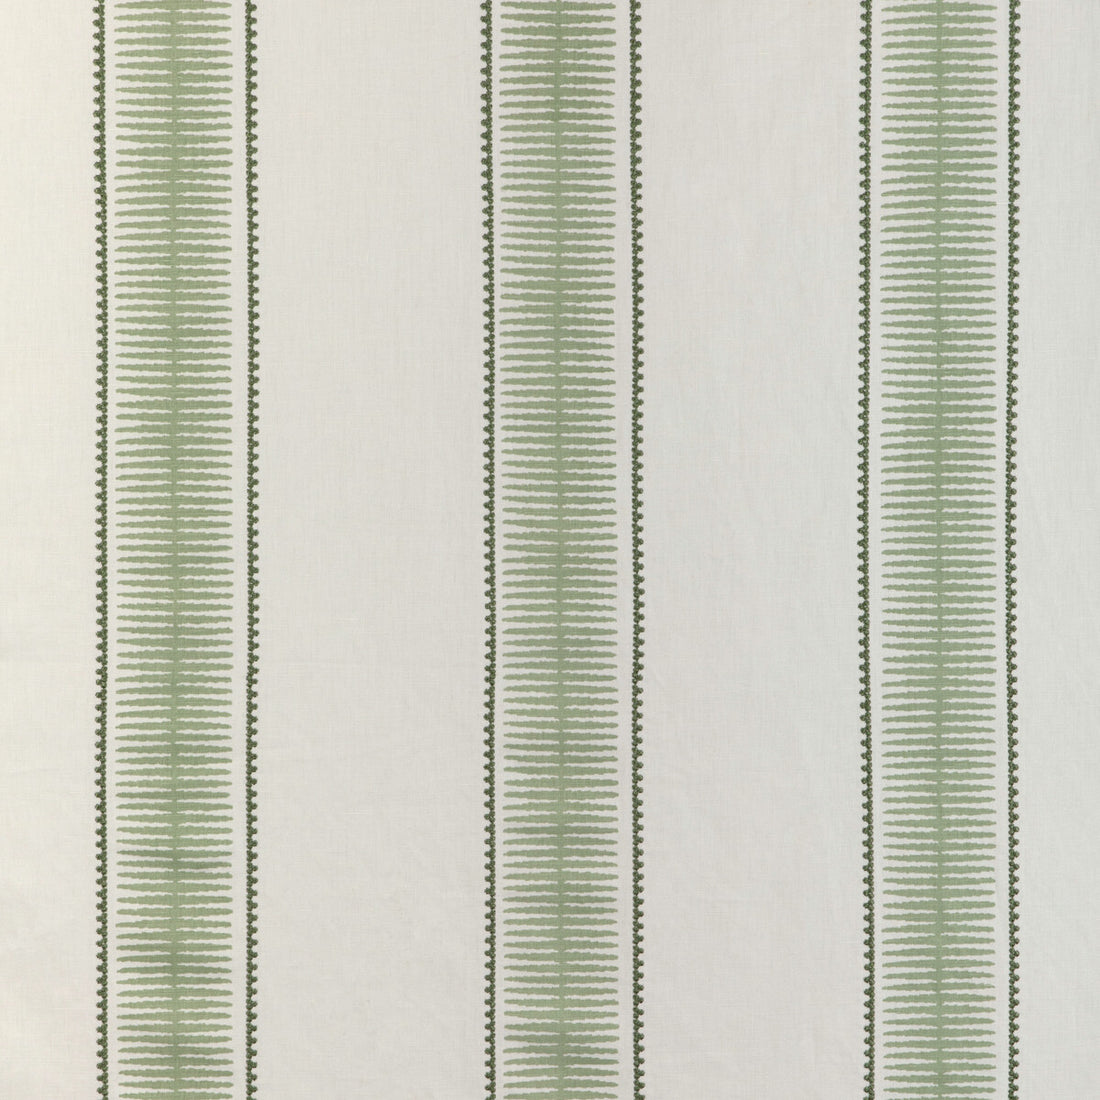 Baluster fabric in leaf color - pattern BALUSTER.3.0 - by Kravet Design in the Alexa Hampton collection